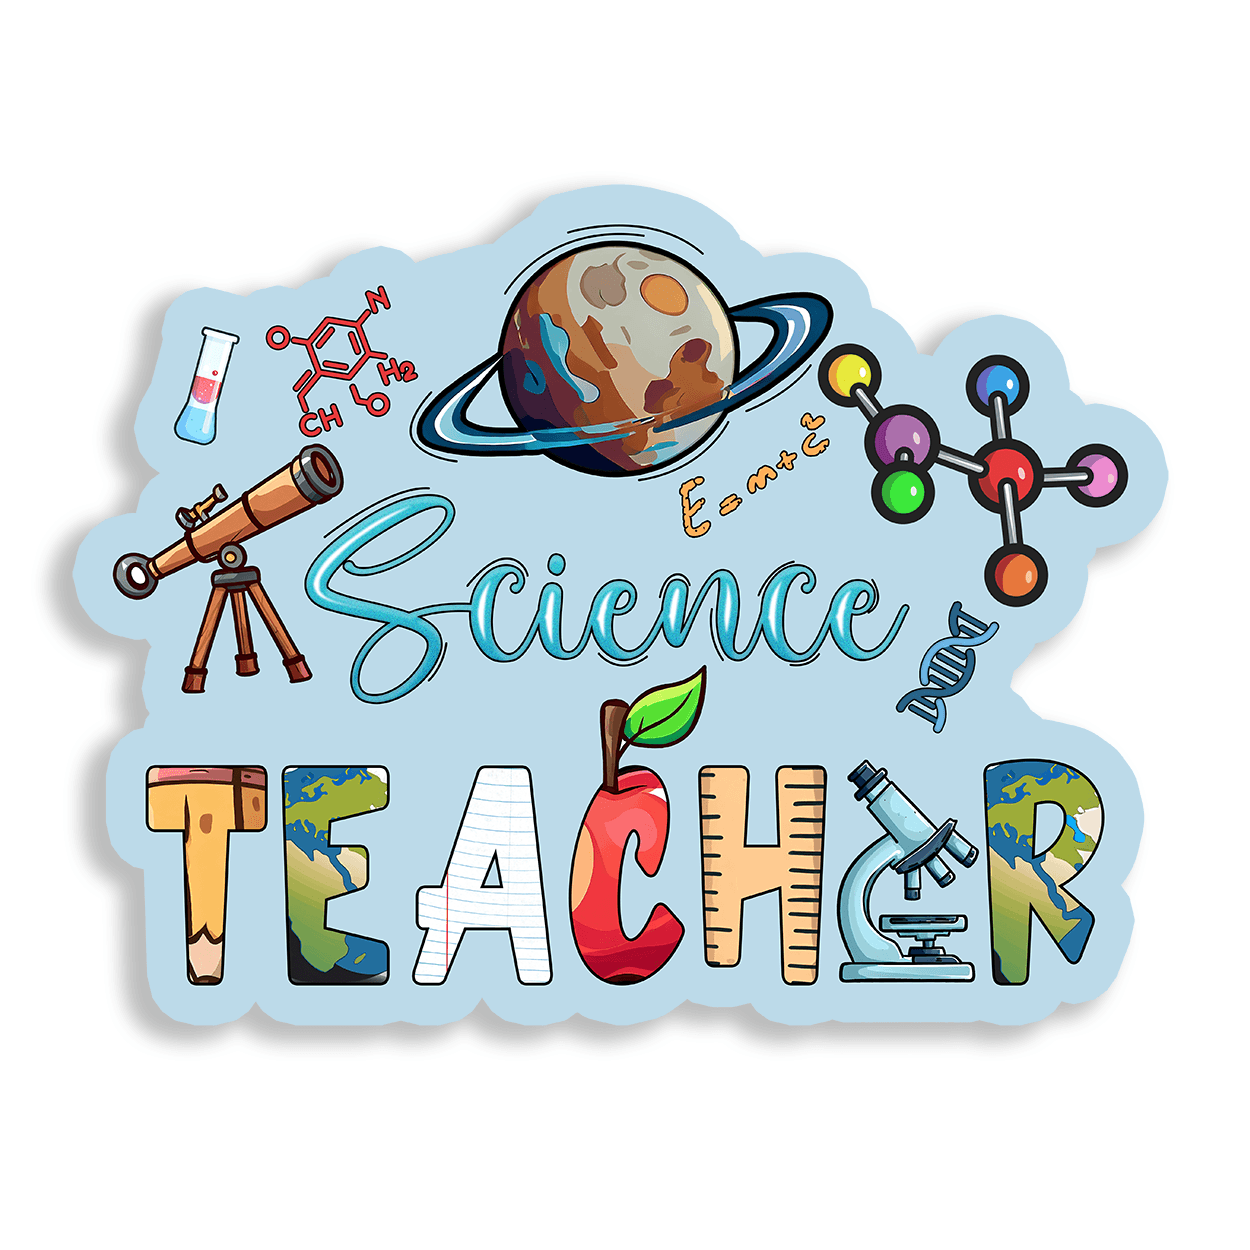 Image of a vinyl sticker that is 3 inch on its longest side with a teacher theme